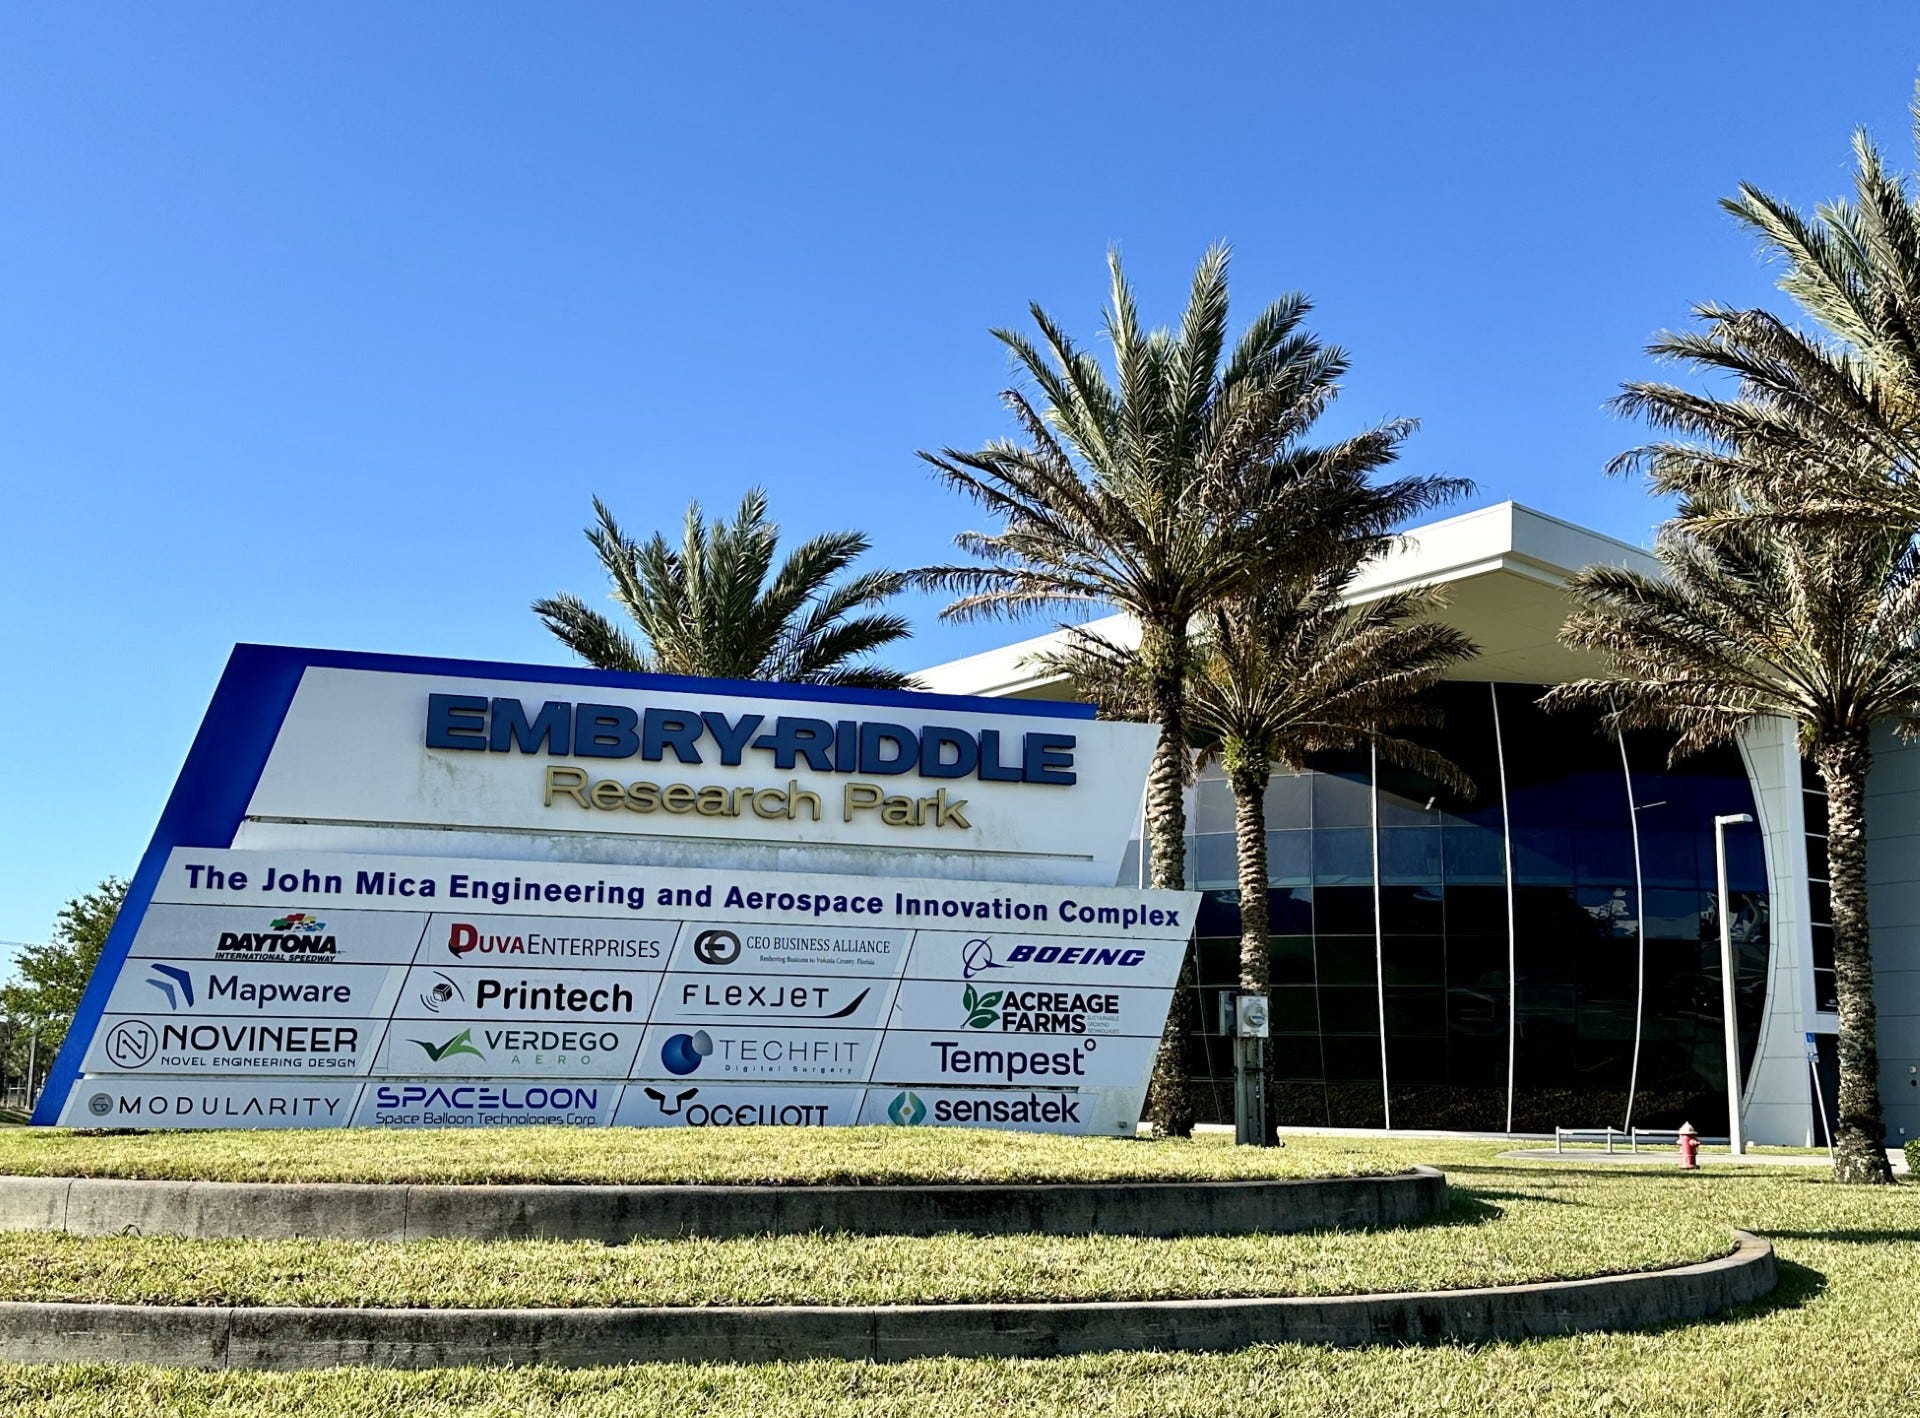 Embry-Riddle Aeronautical University's research park, which first opened in 2017 with the MicaPlex building, is on its way to buildout with seven separate research structures totaling more than 250,000 square feet of space.